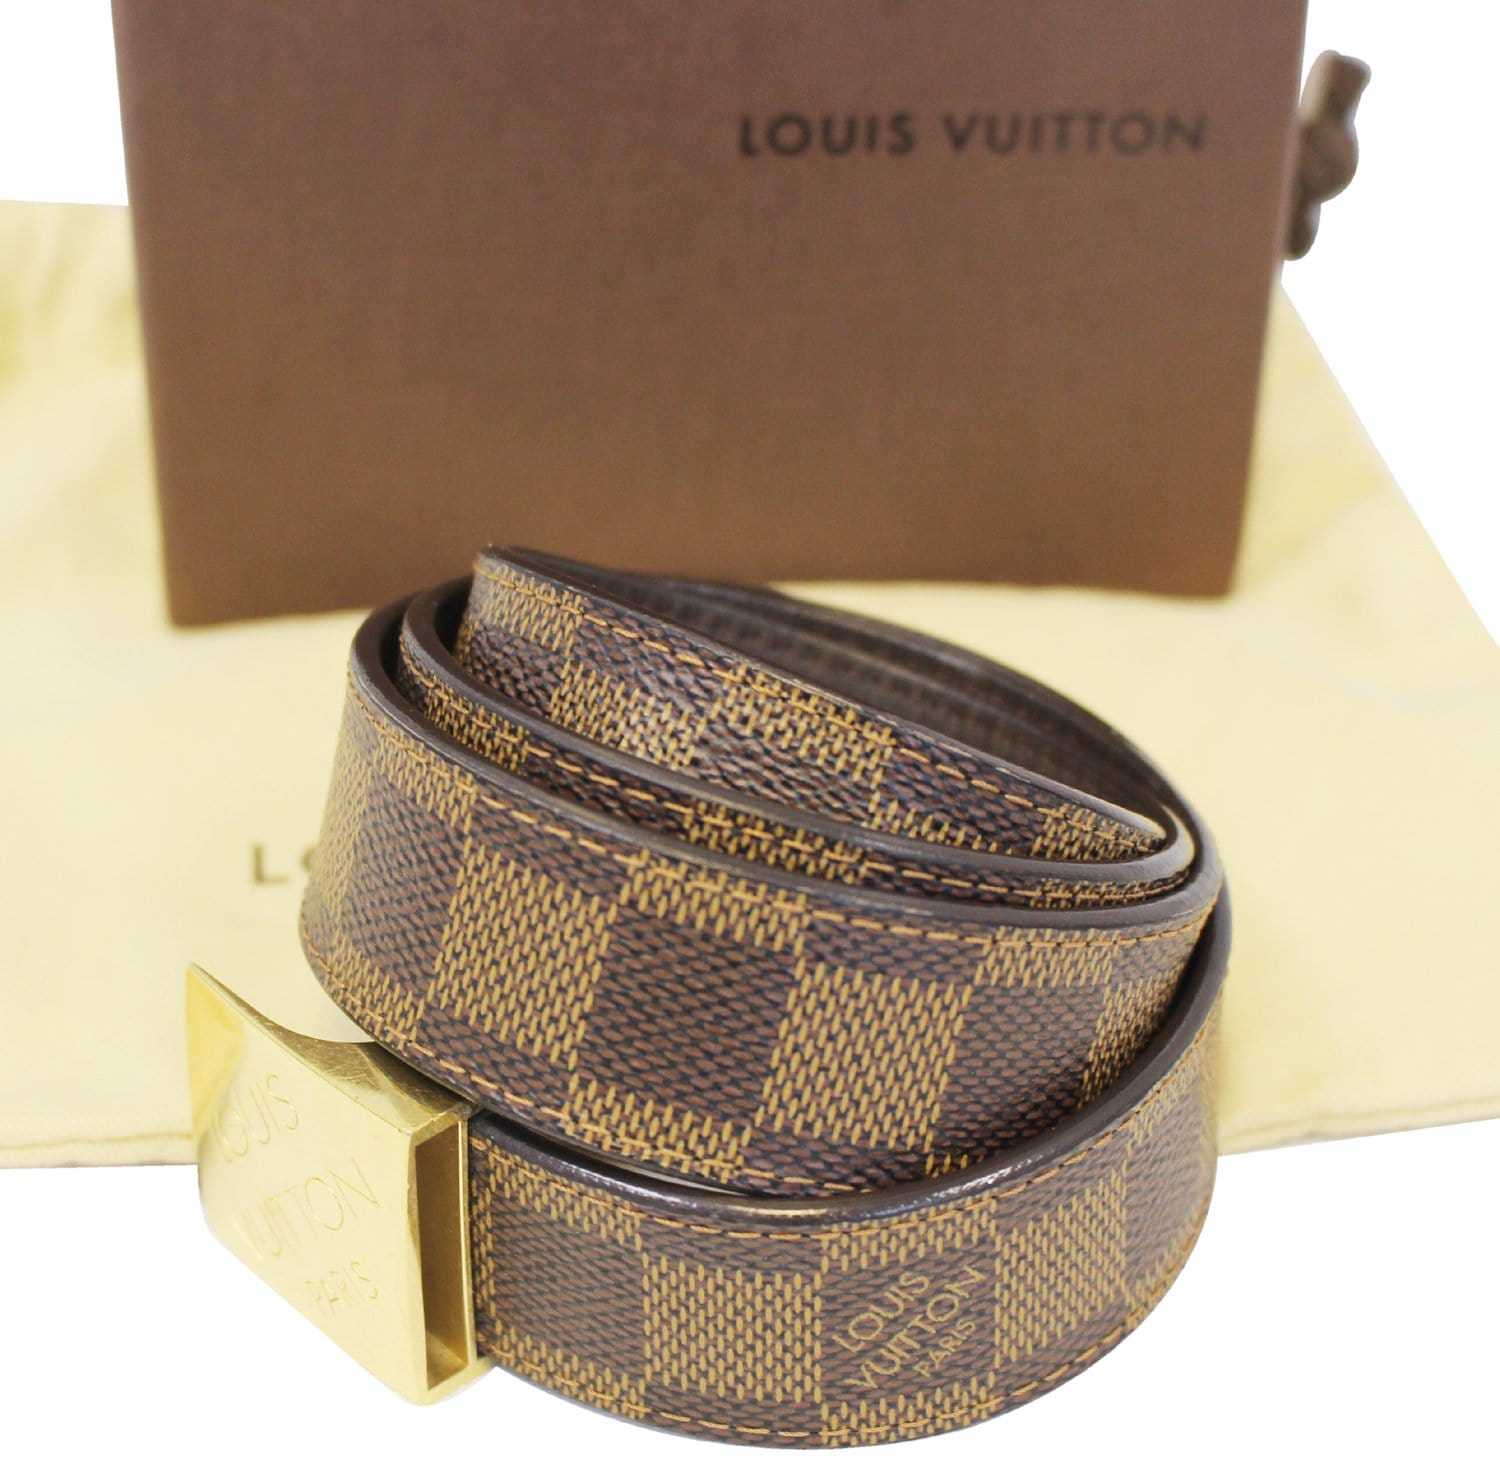 Louis Vuitton Mens Belts, Brown, 90cm (Stock Confirmation Required)